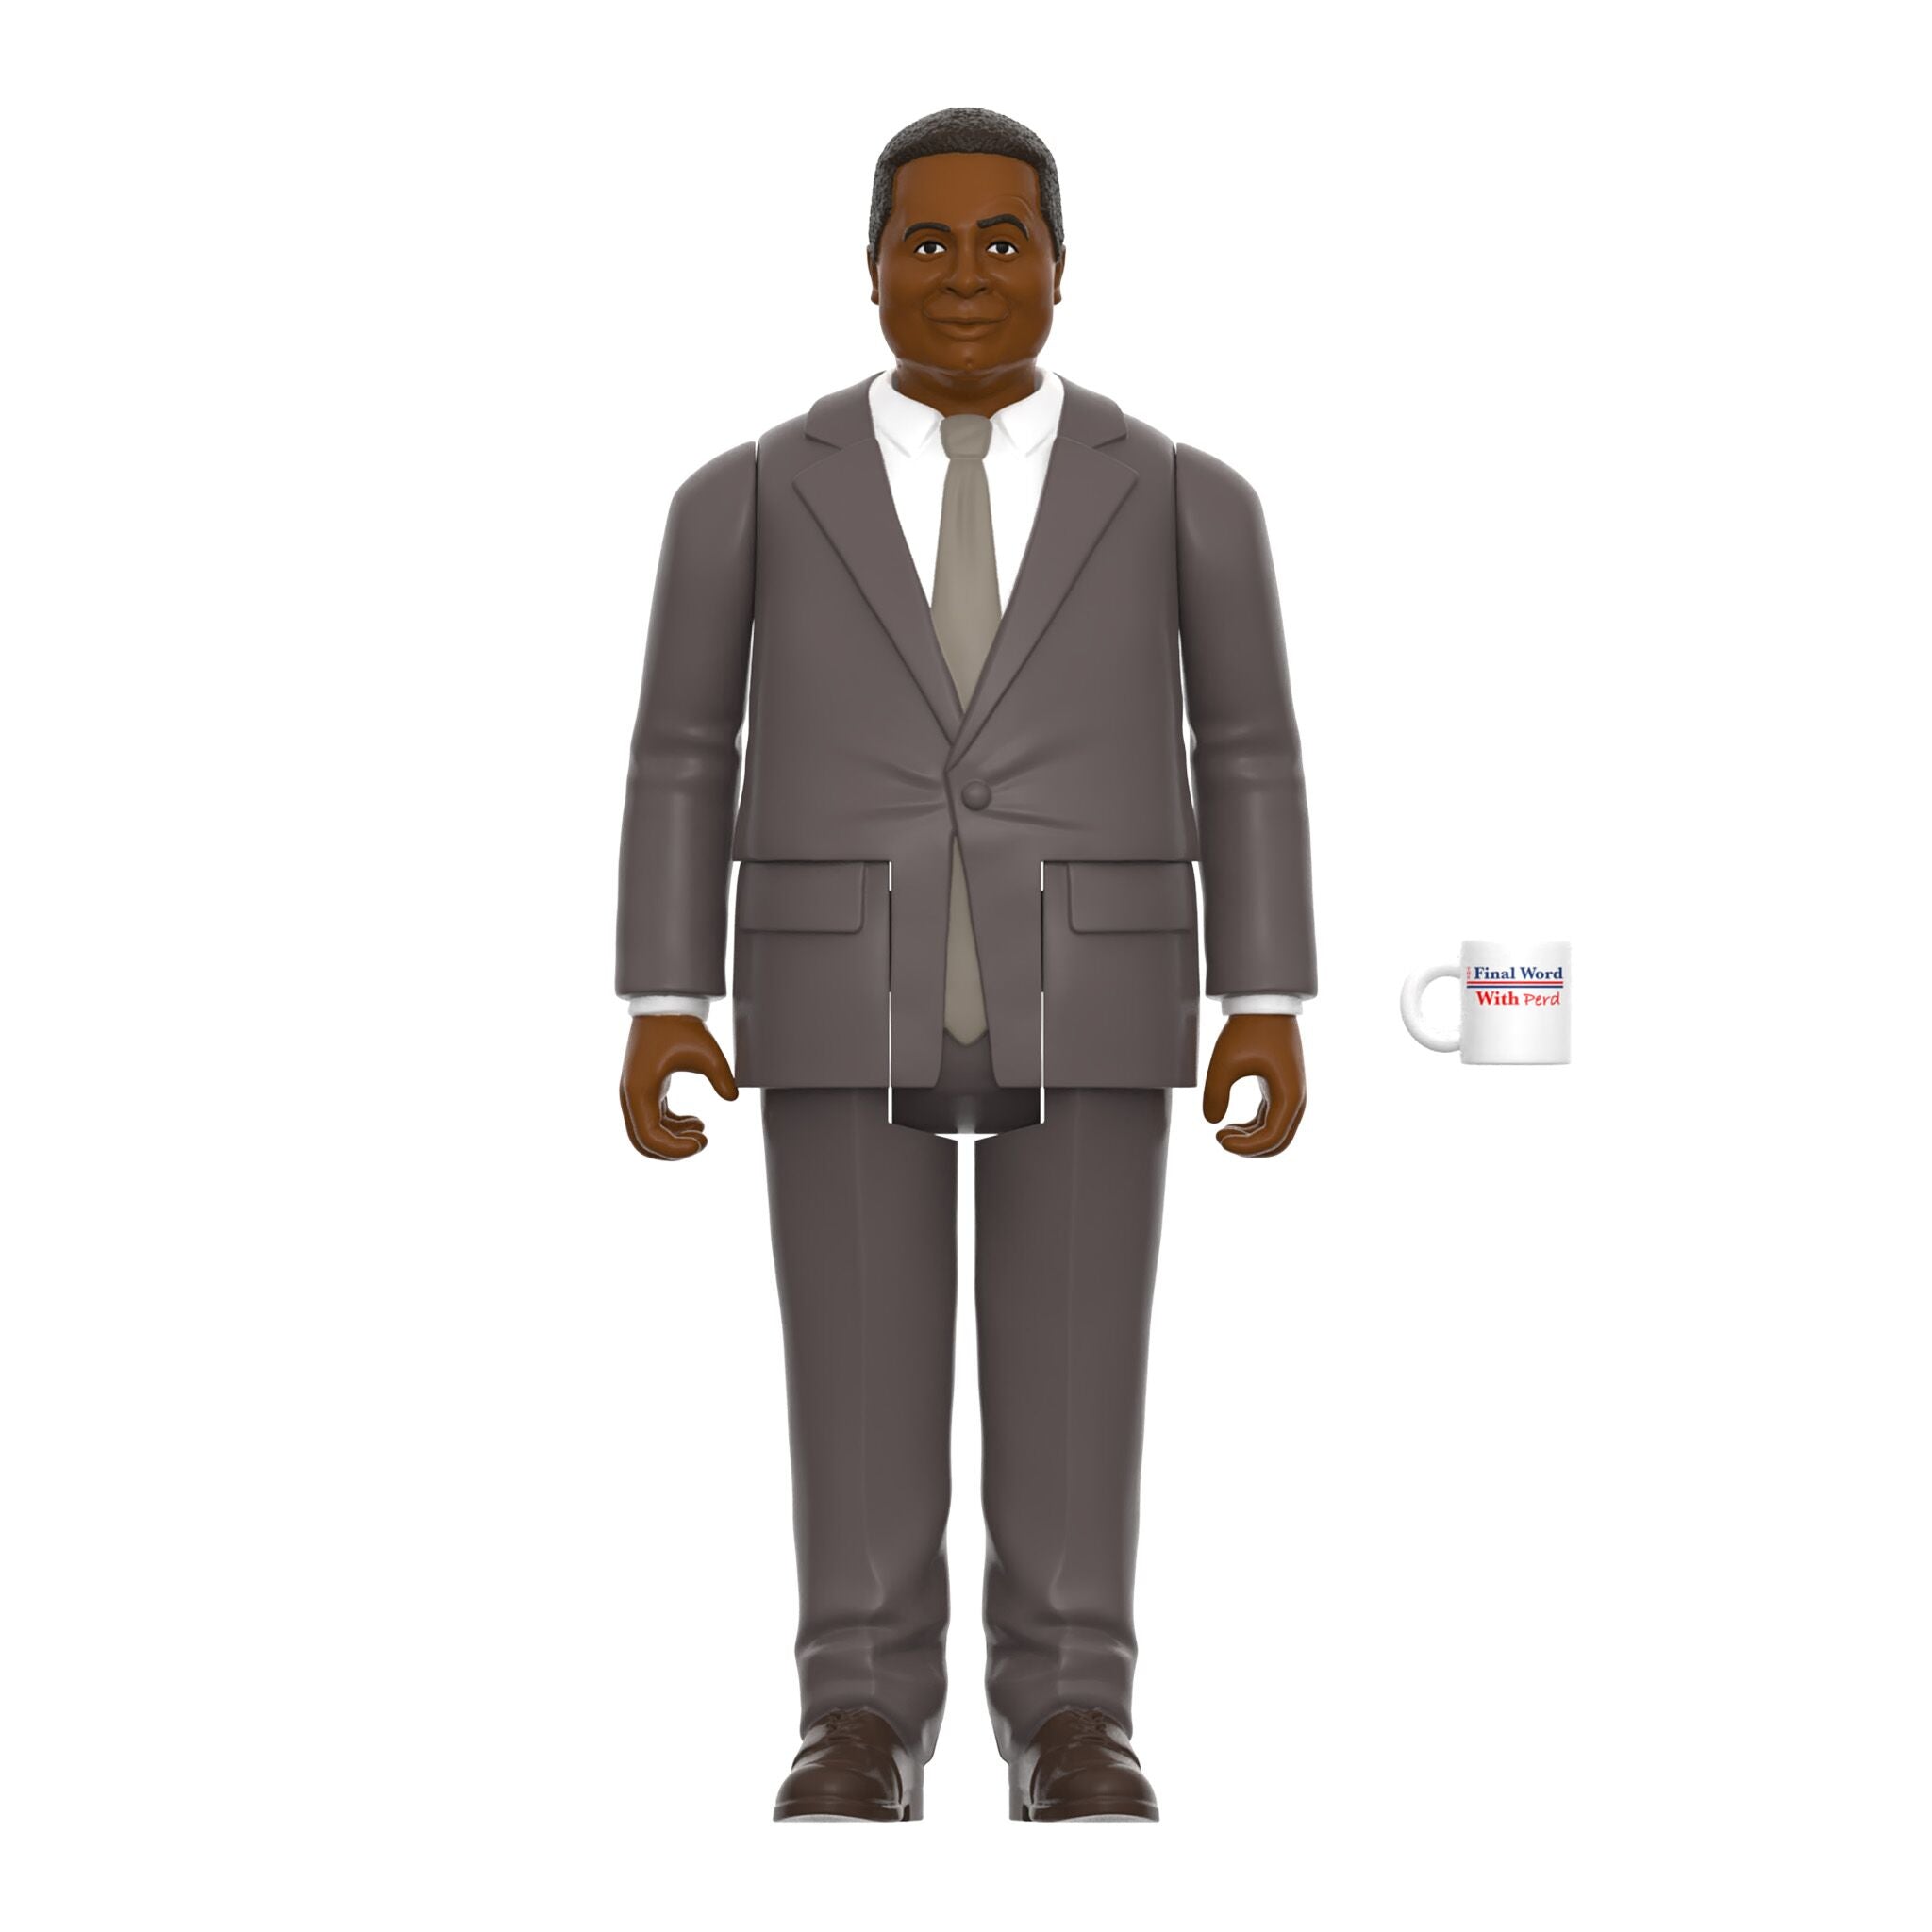 Parks and Recreation ReAction Wave 3 - Perd Hapley